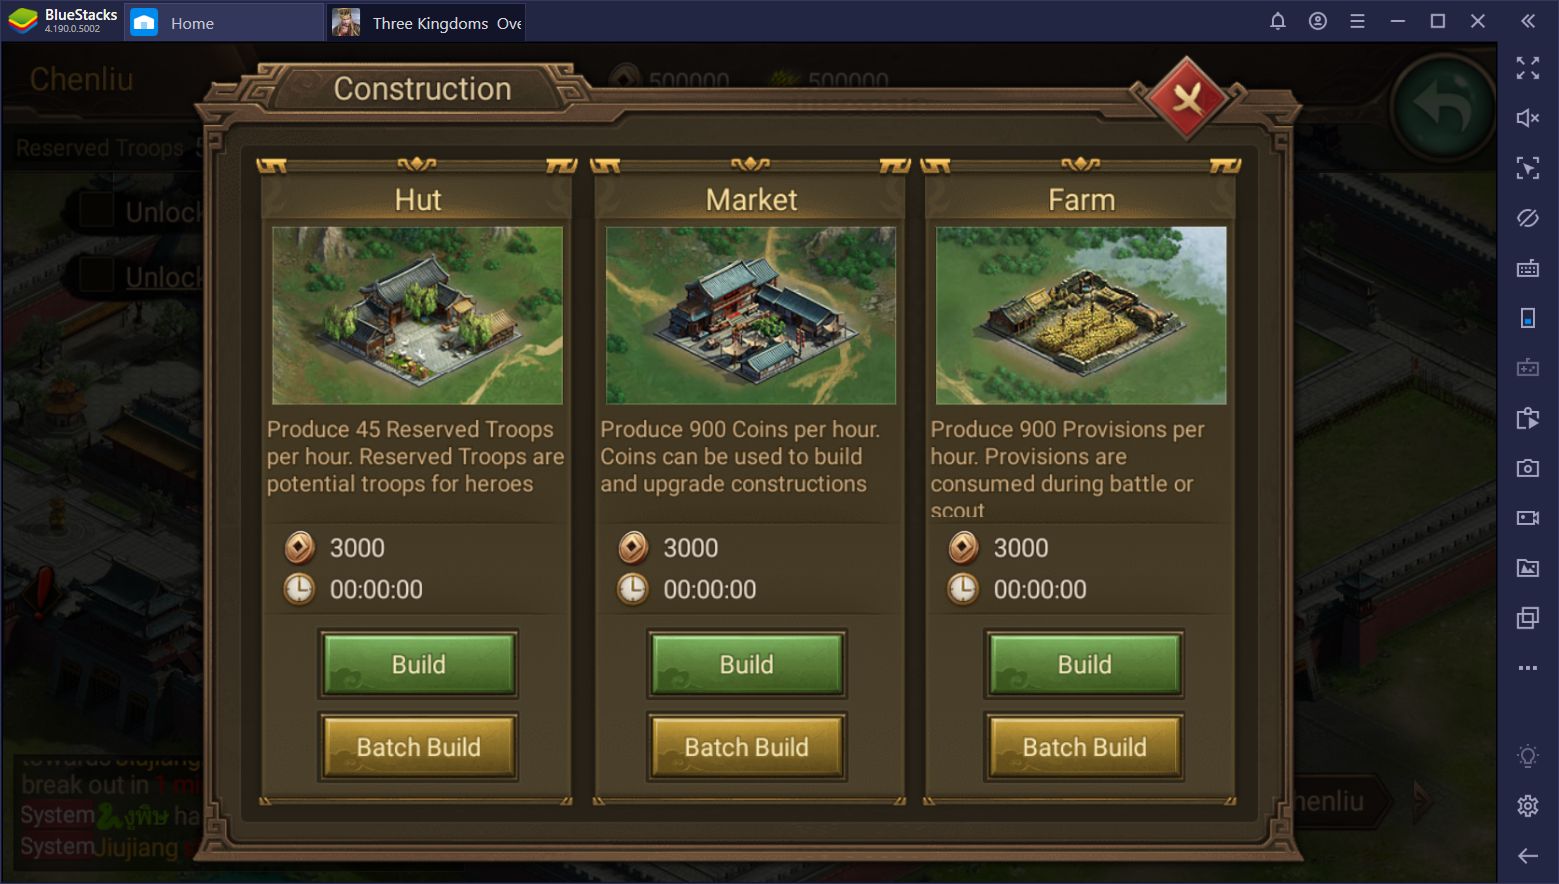 Three Kingdoms: Overlord - Beginner’s Guide on Founding and Expanding Your Empire